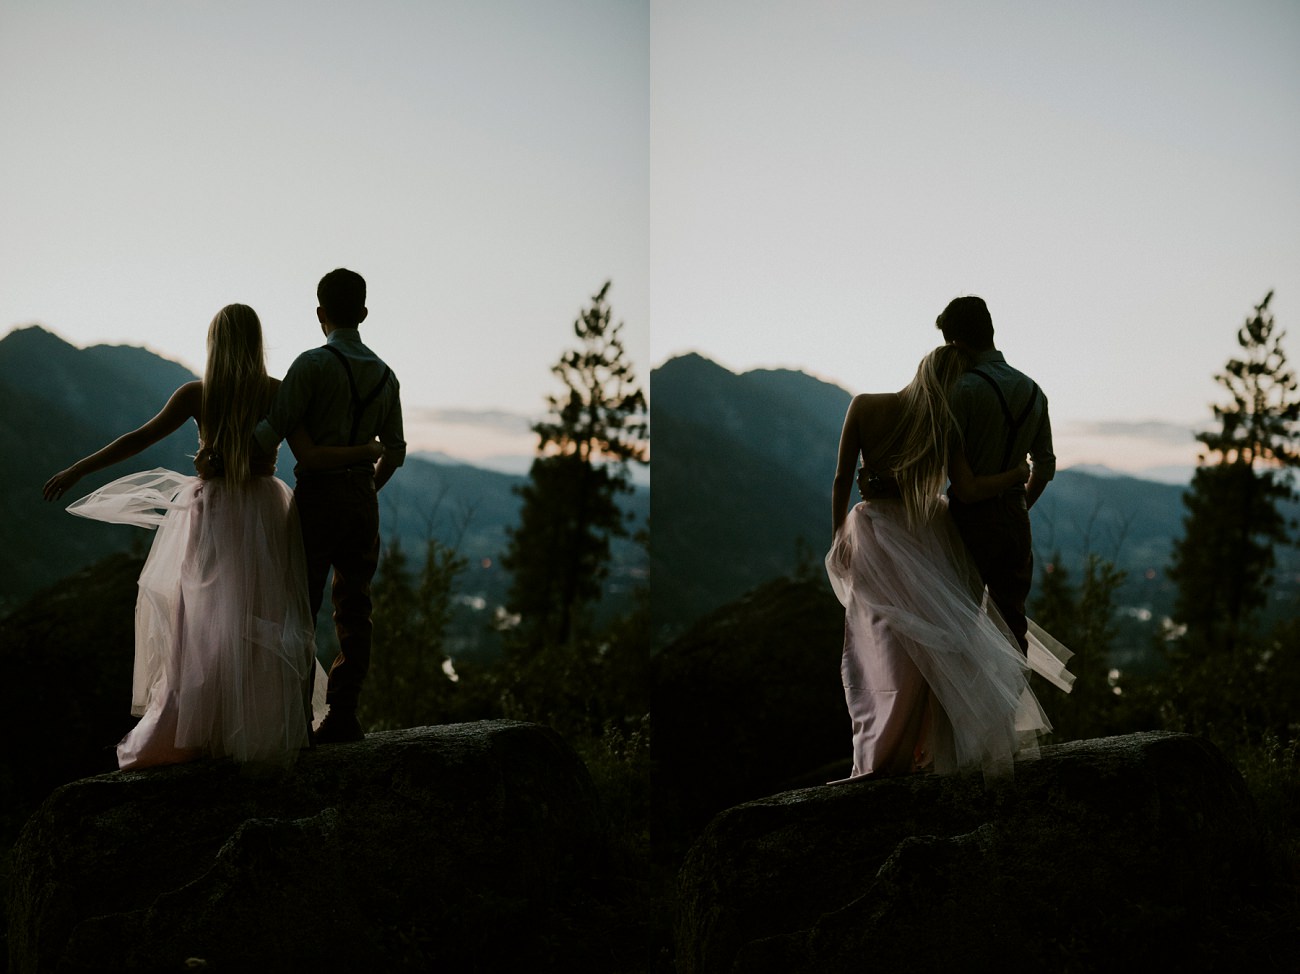 Moody and adventure filled mountain elopement Leavenworth washington